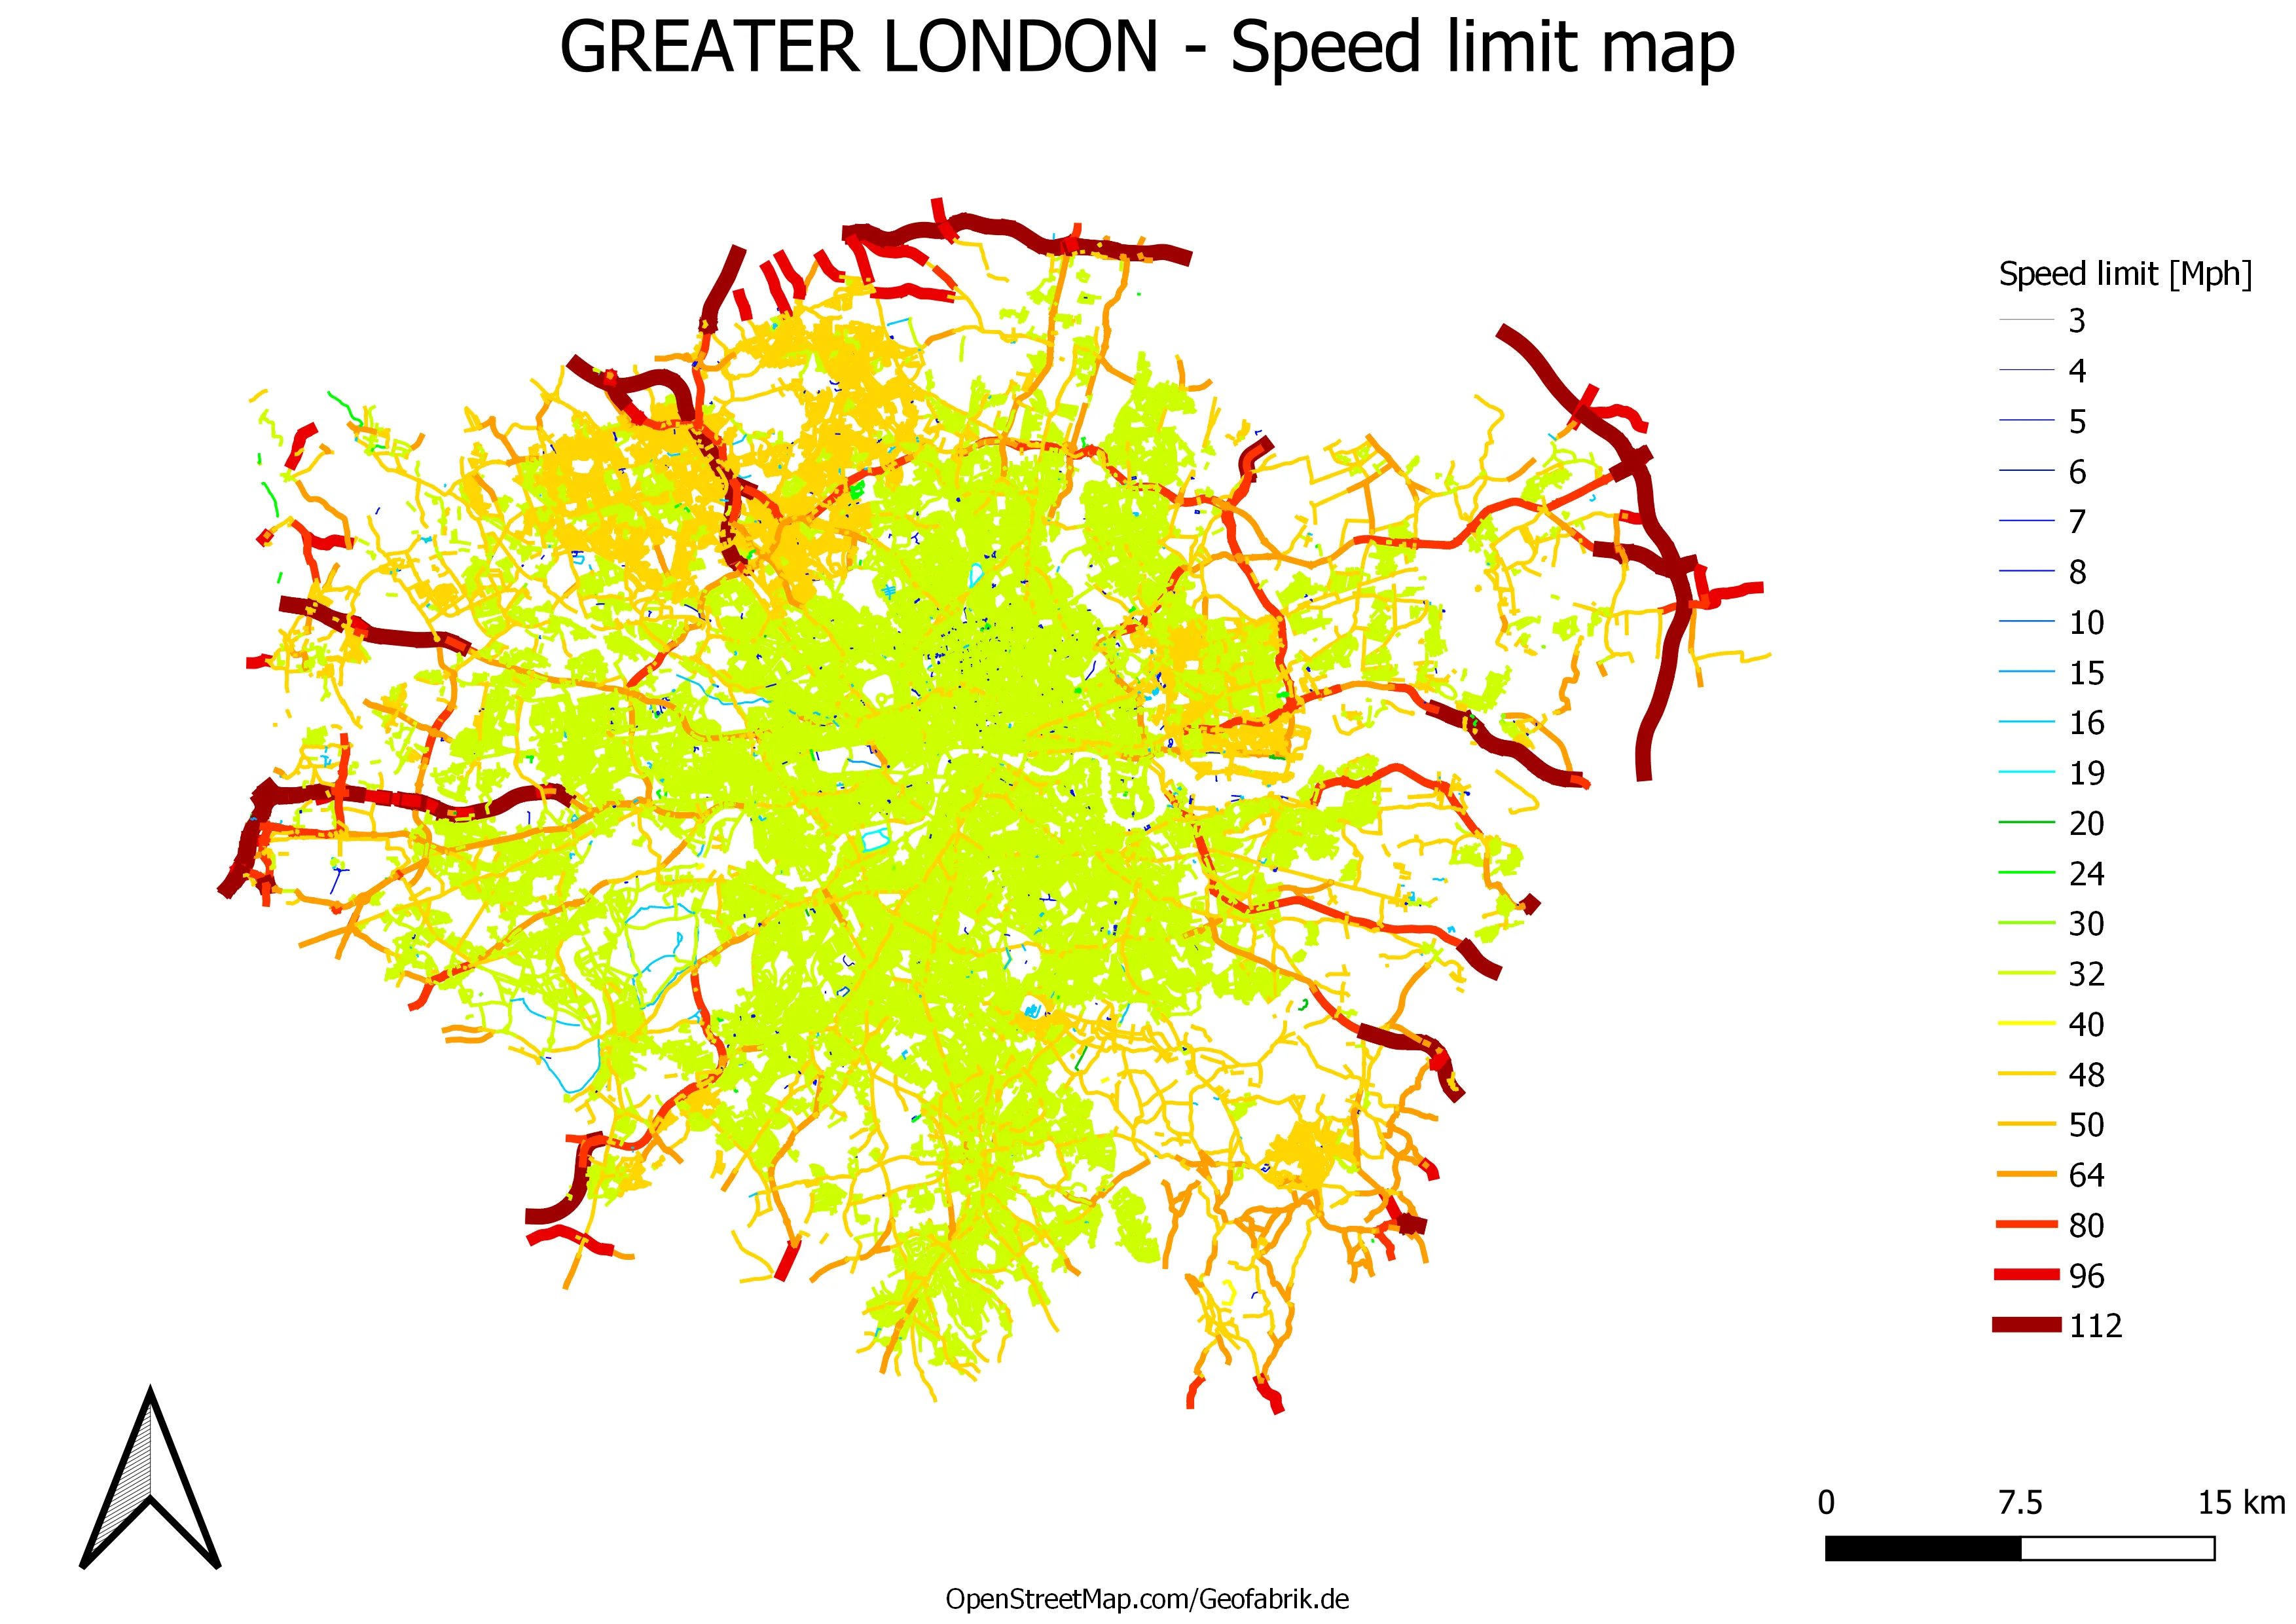 Greater London - speed limit map made in QGIS print composer